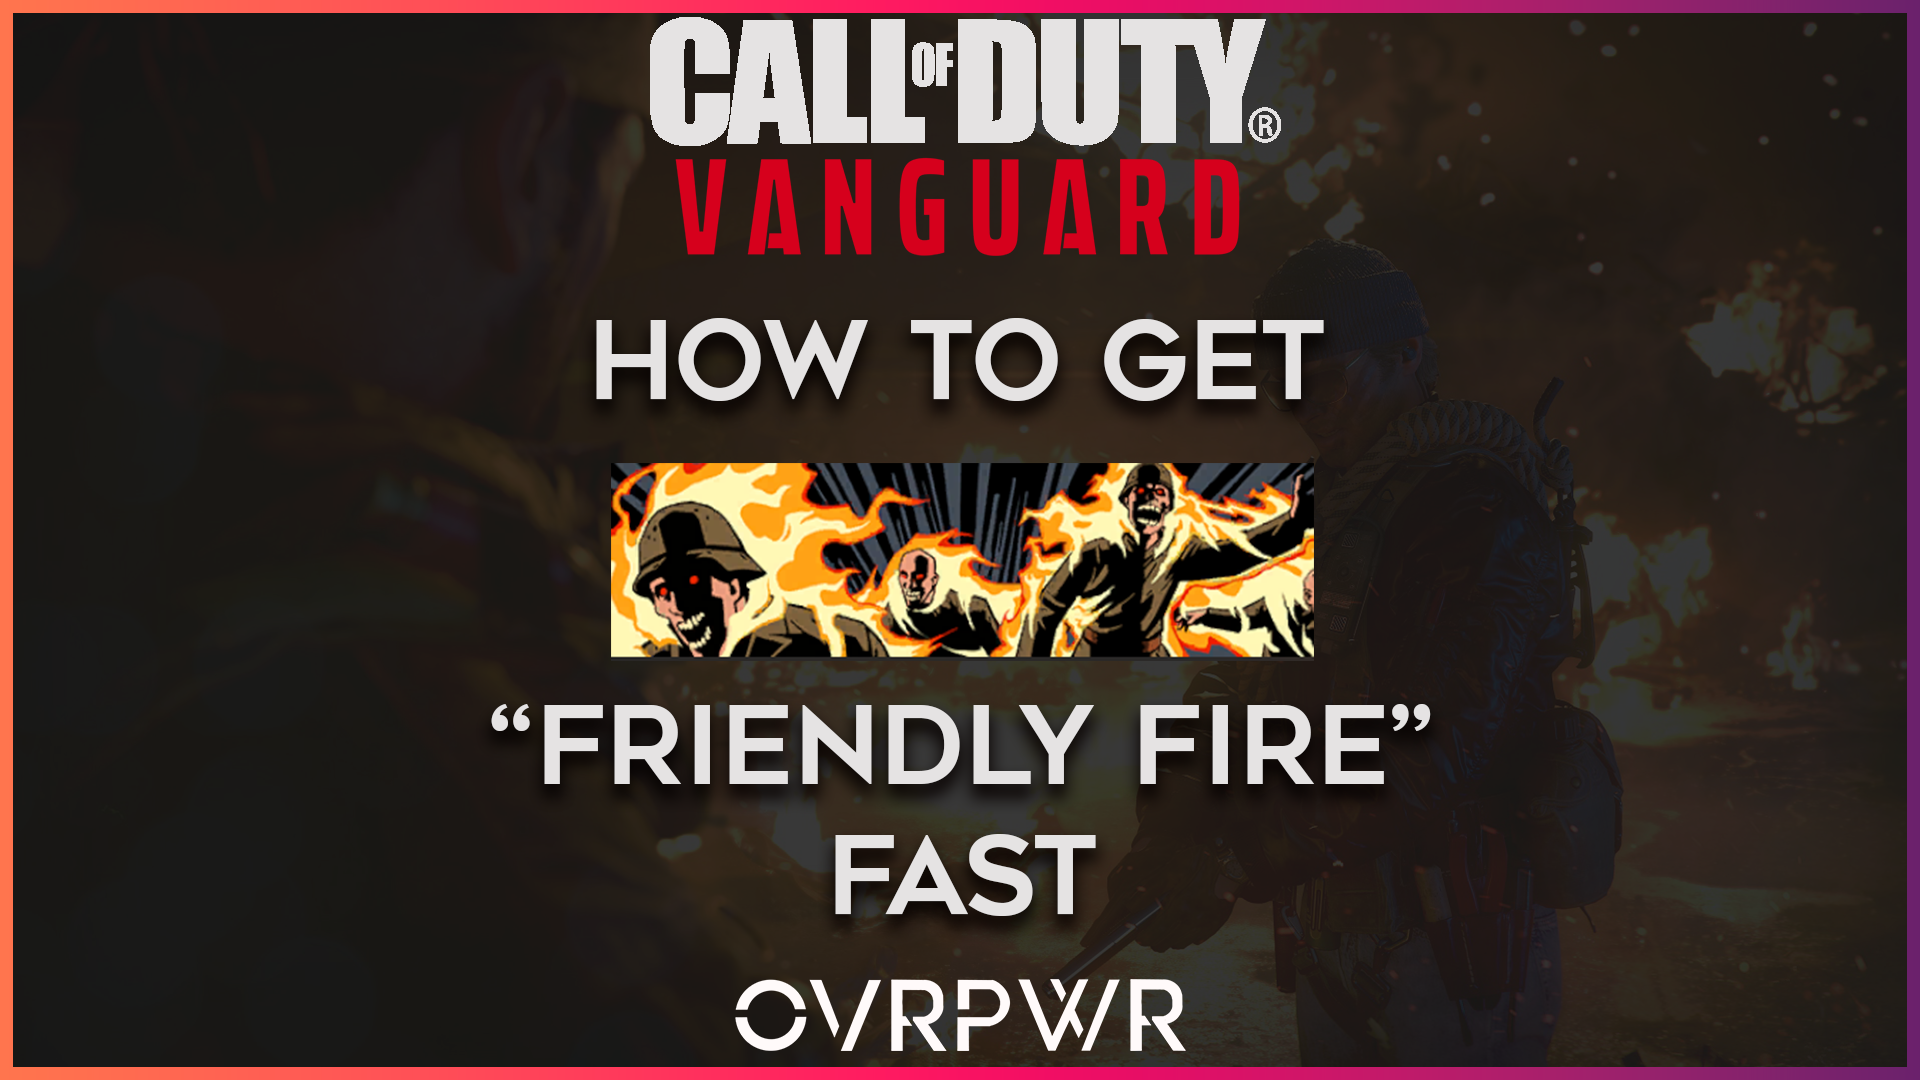 How to get the Friendly Fire in Vanguard